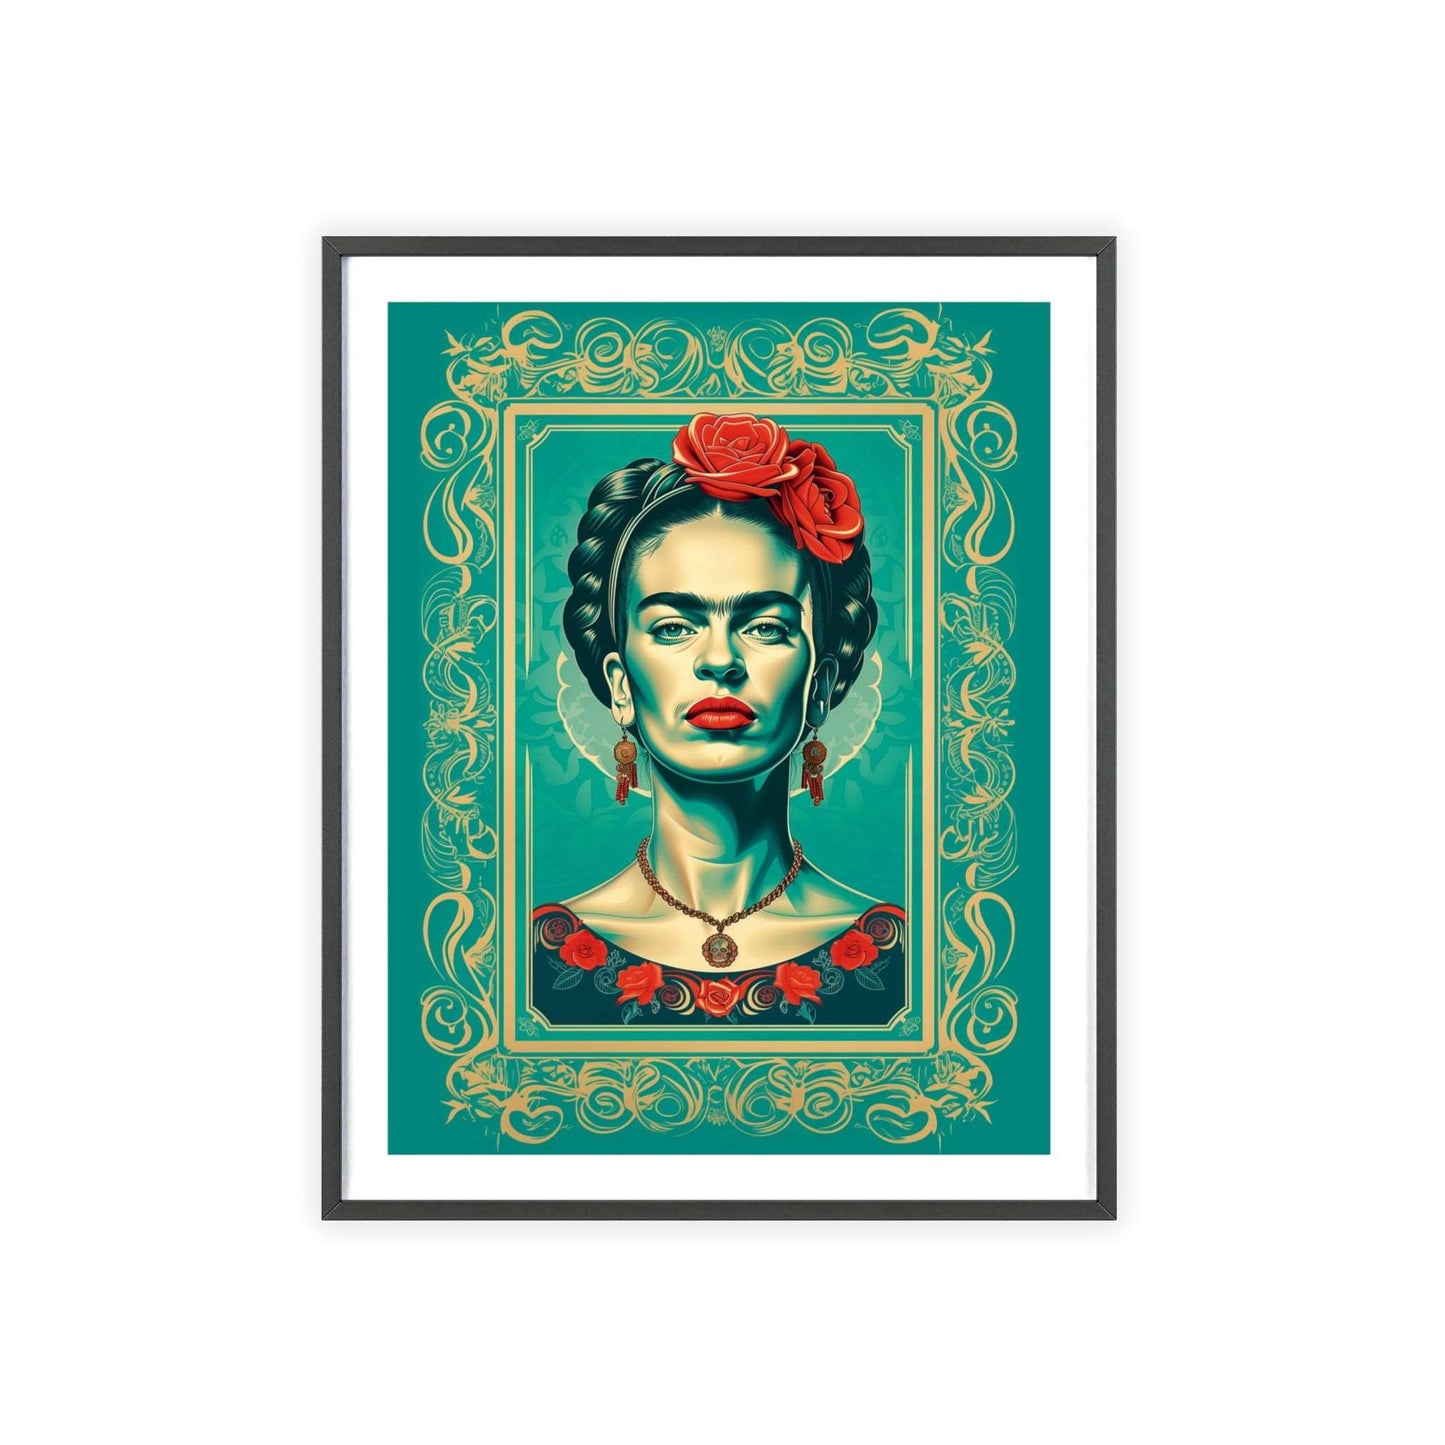 Framed portrait poster of Frida Kahlo in a modern vector design. Her features are rendered in gold, with aquamarine accents. The background is aquamarine.